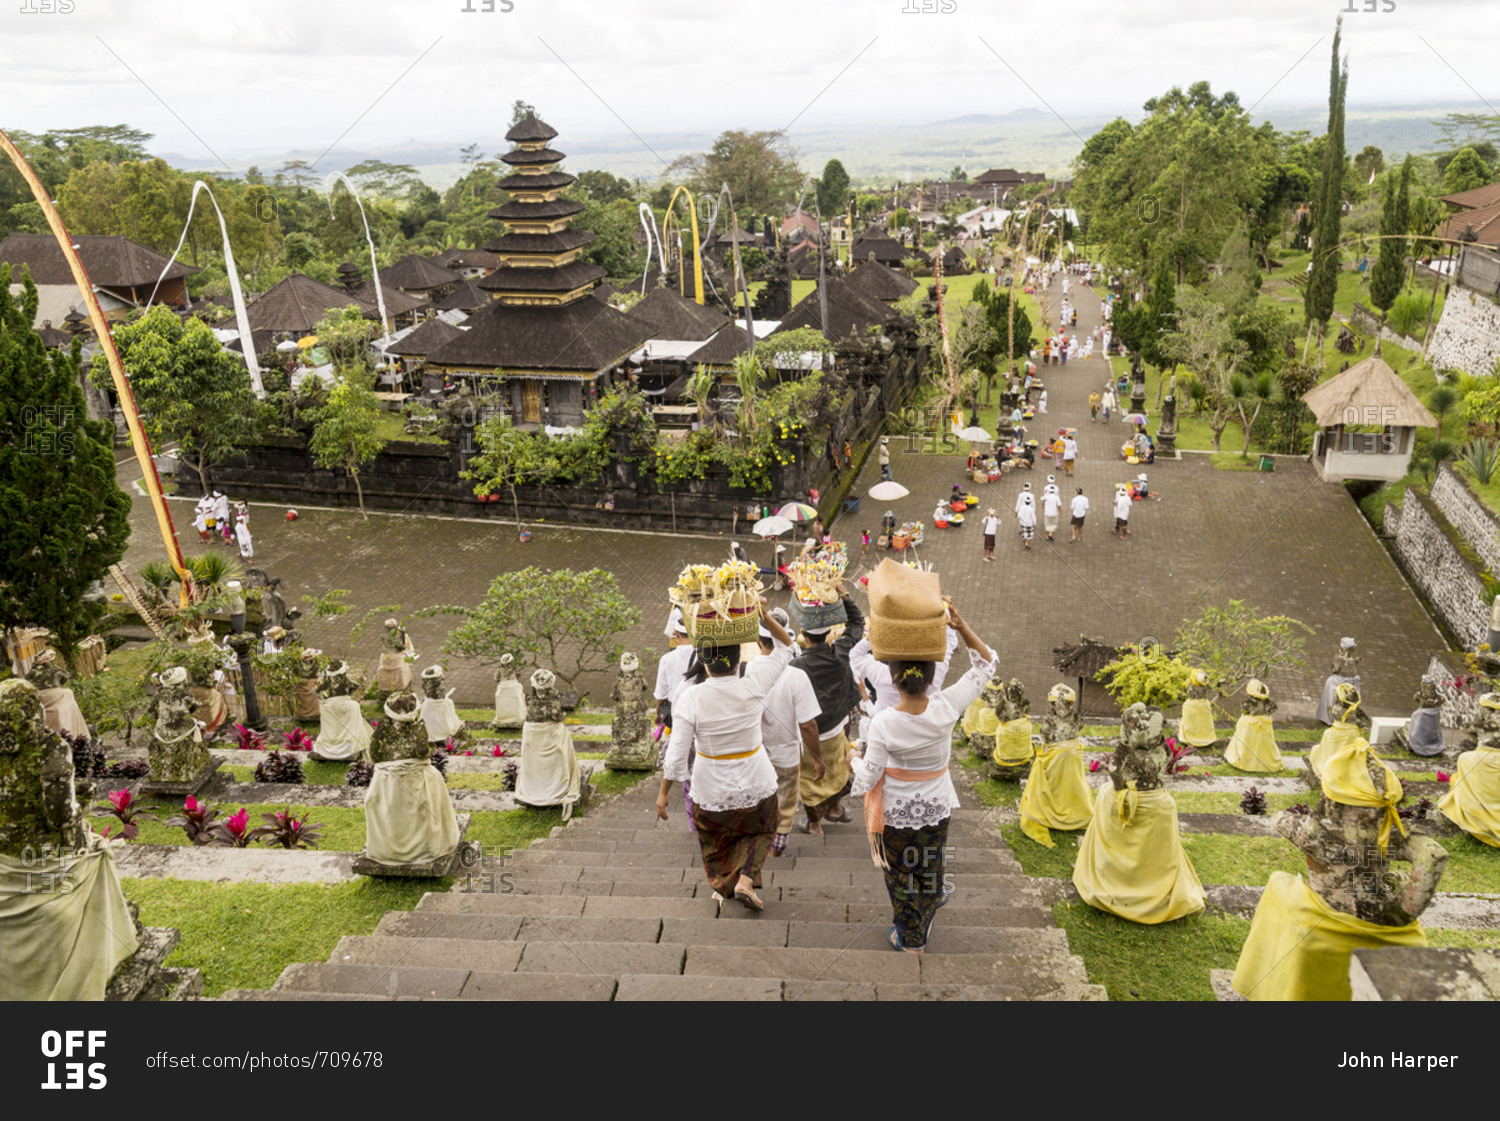 Looking down on procession of worshippers carrying offerings as they descend the stairs of Besakih Temple in Bali, Indonesia